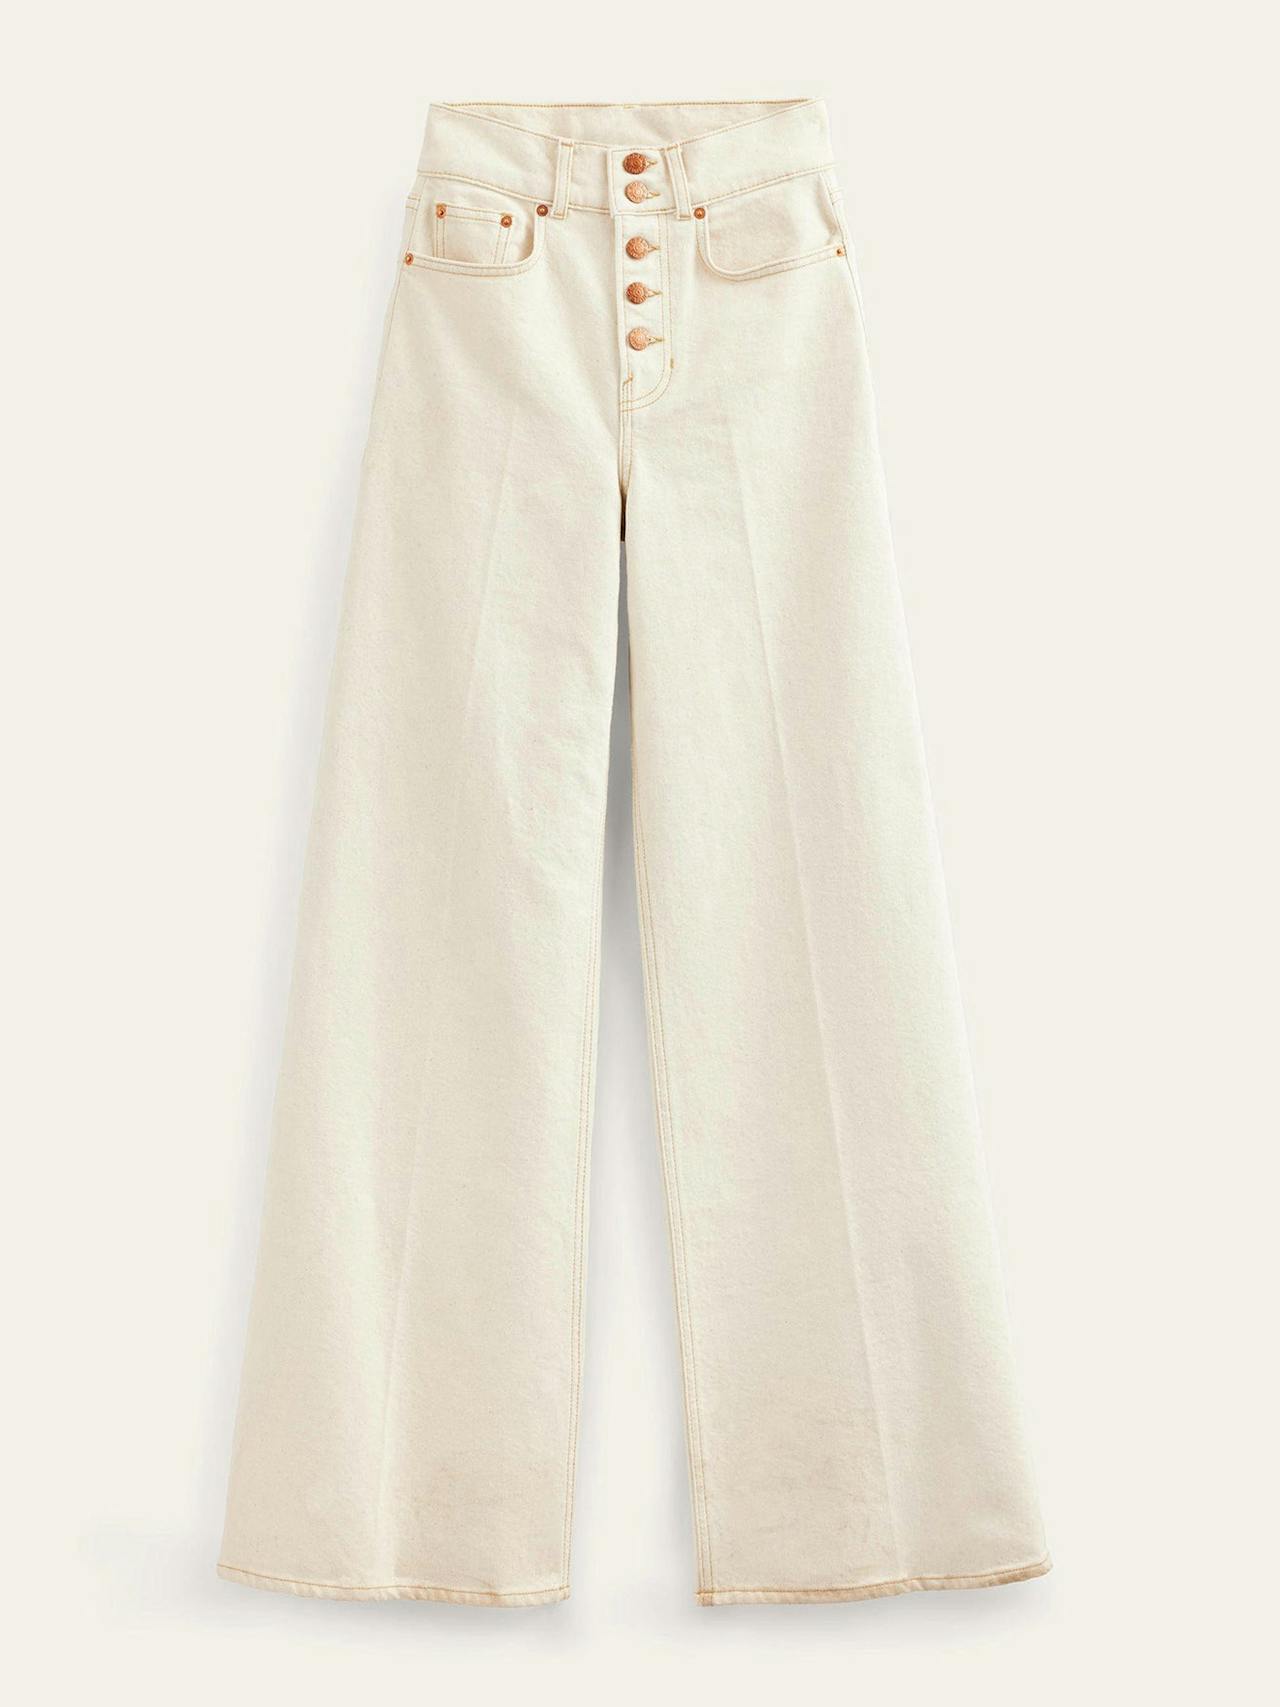 Ultra high rise white jeans